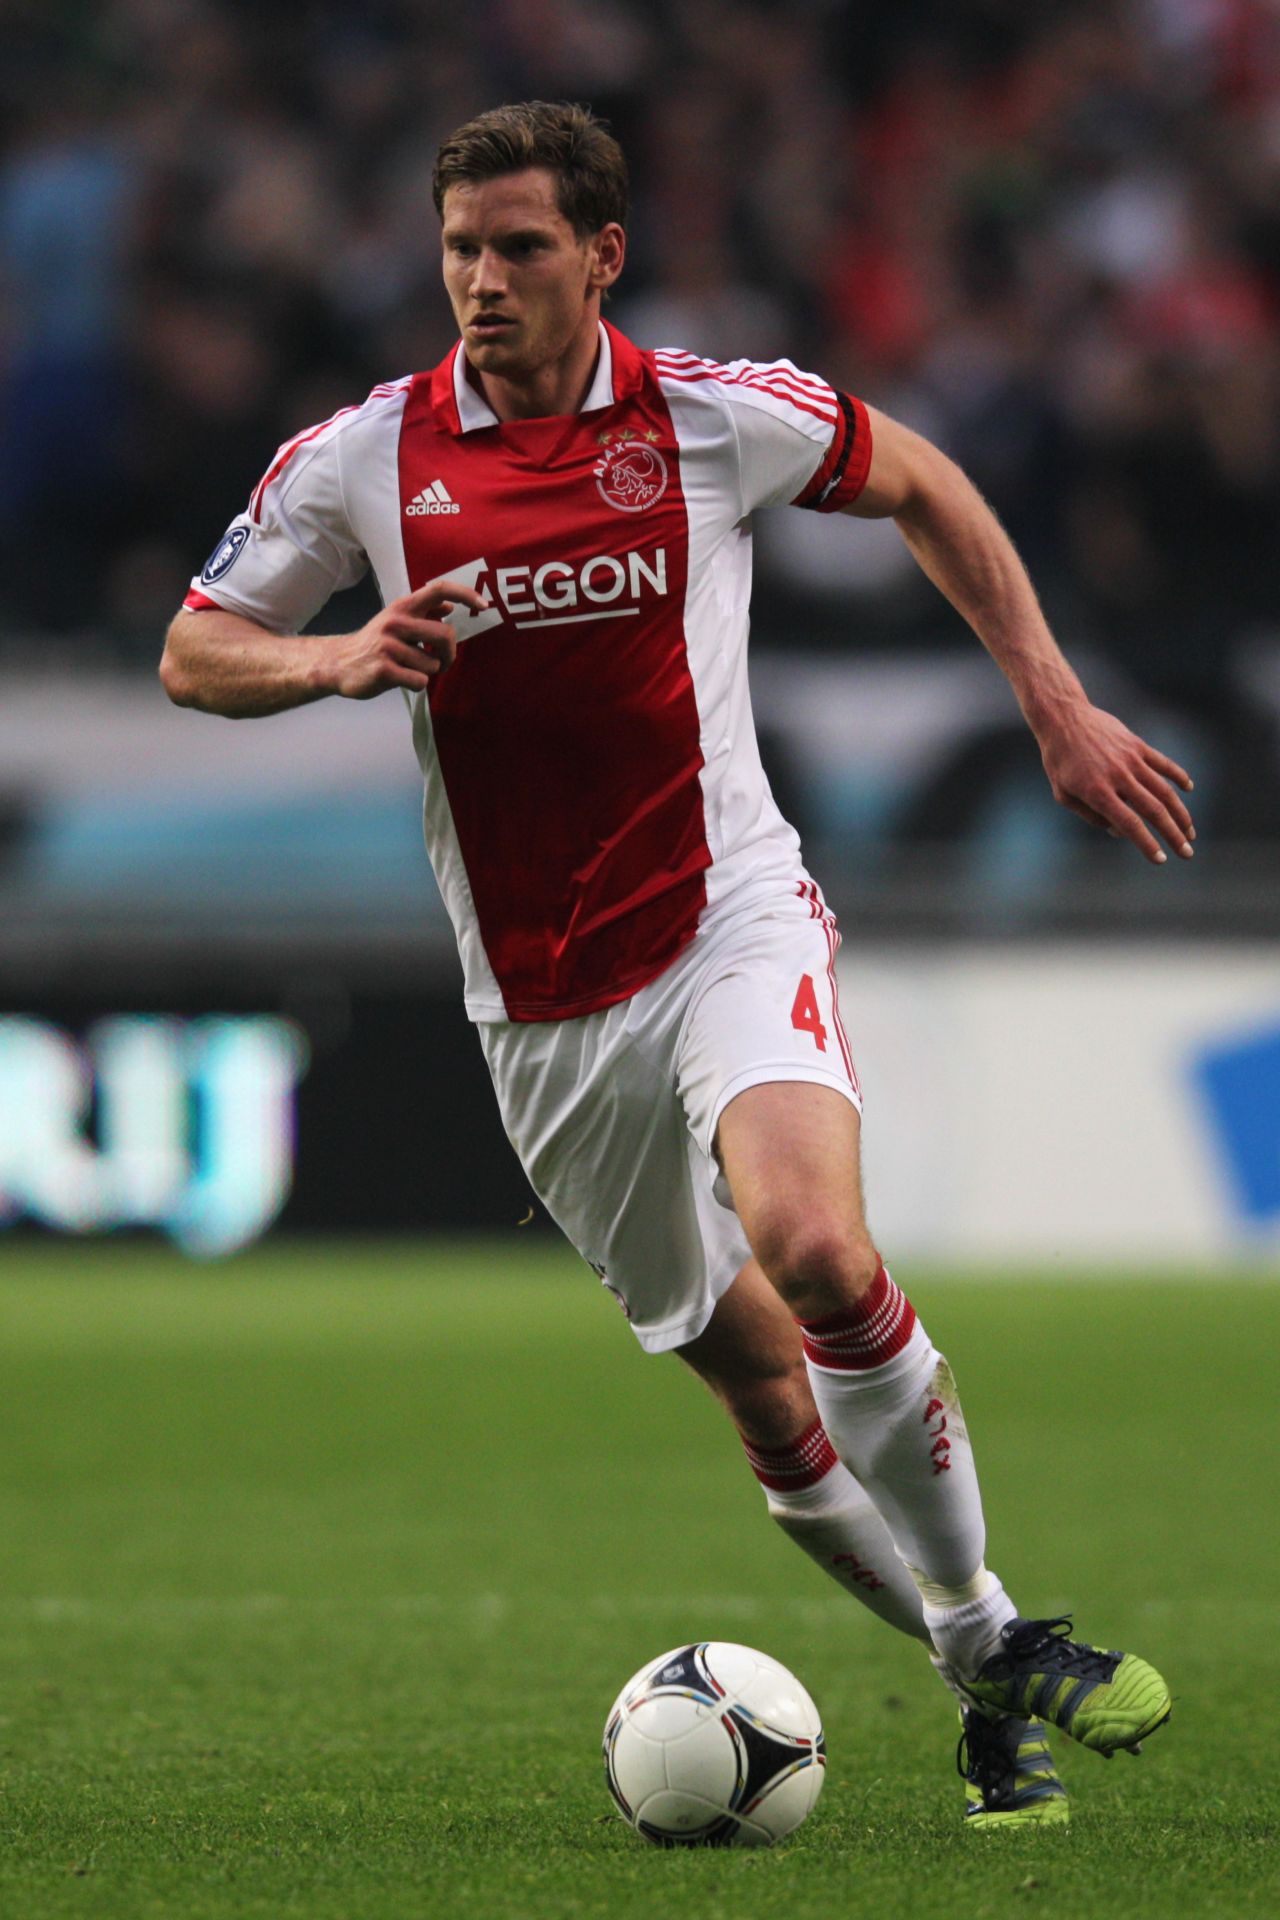 Belgium's Jan Vertonghen made his debut for Dutch champions Ajax in 2006. Before moving to English Premier League club Spurs, the Belgian studied sport marketing at the Johan Cruyff University in between his training and matches.